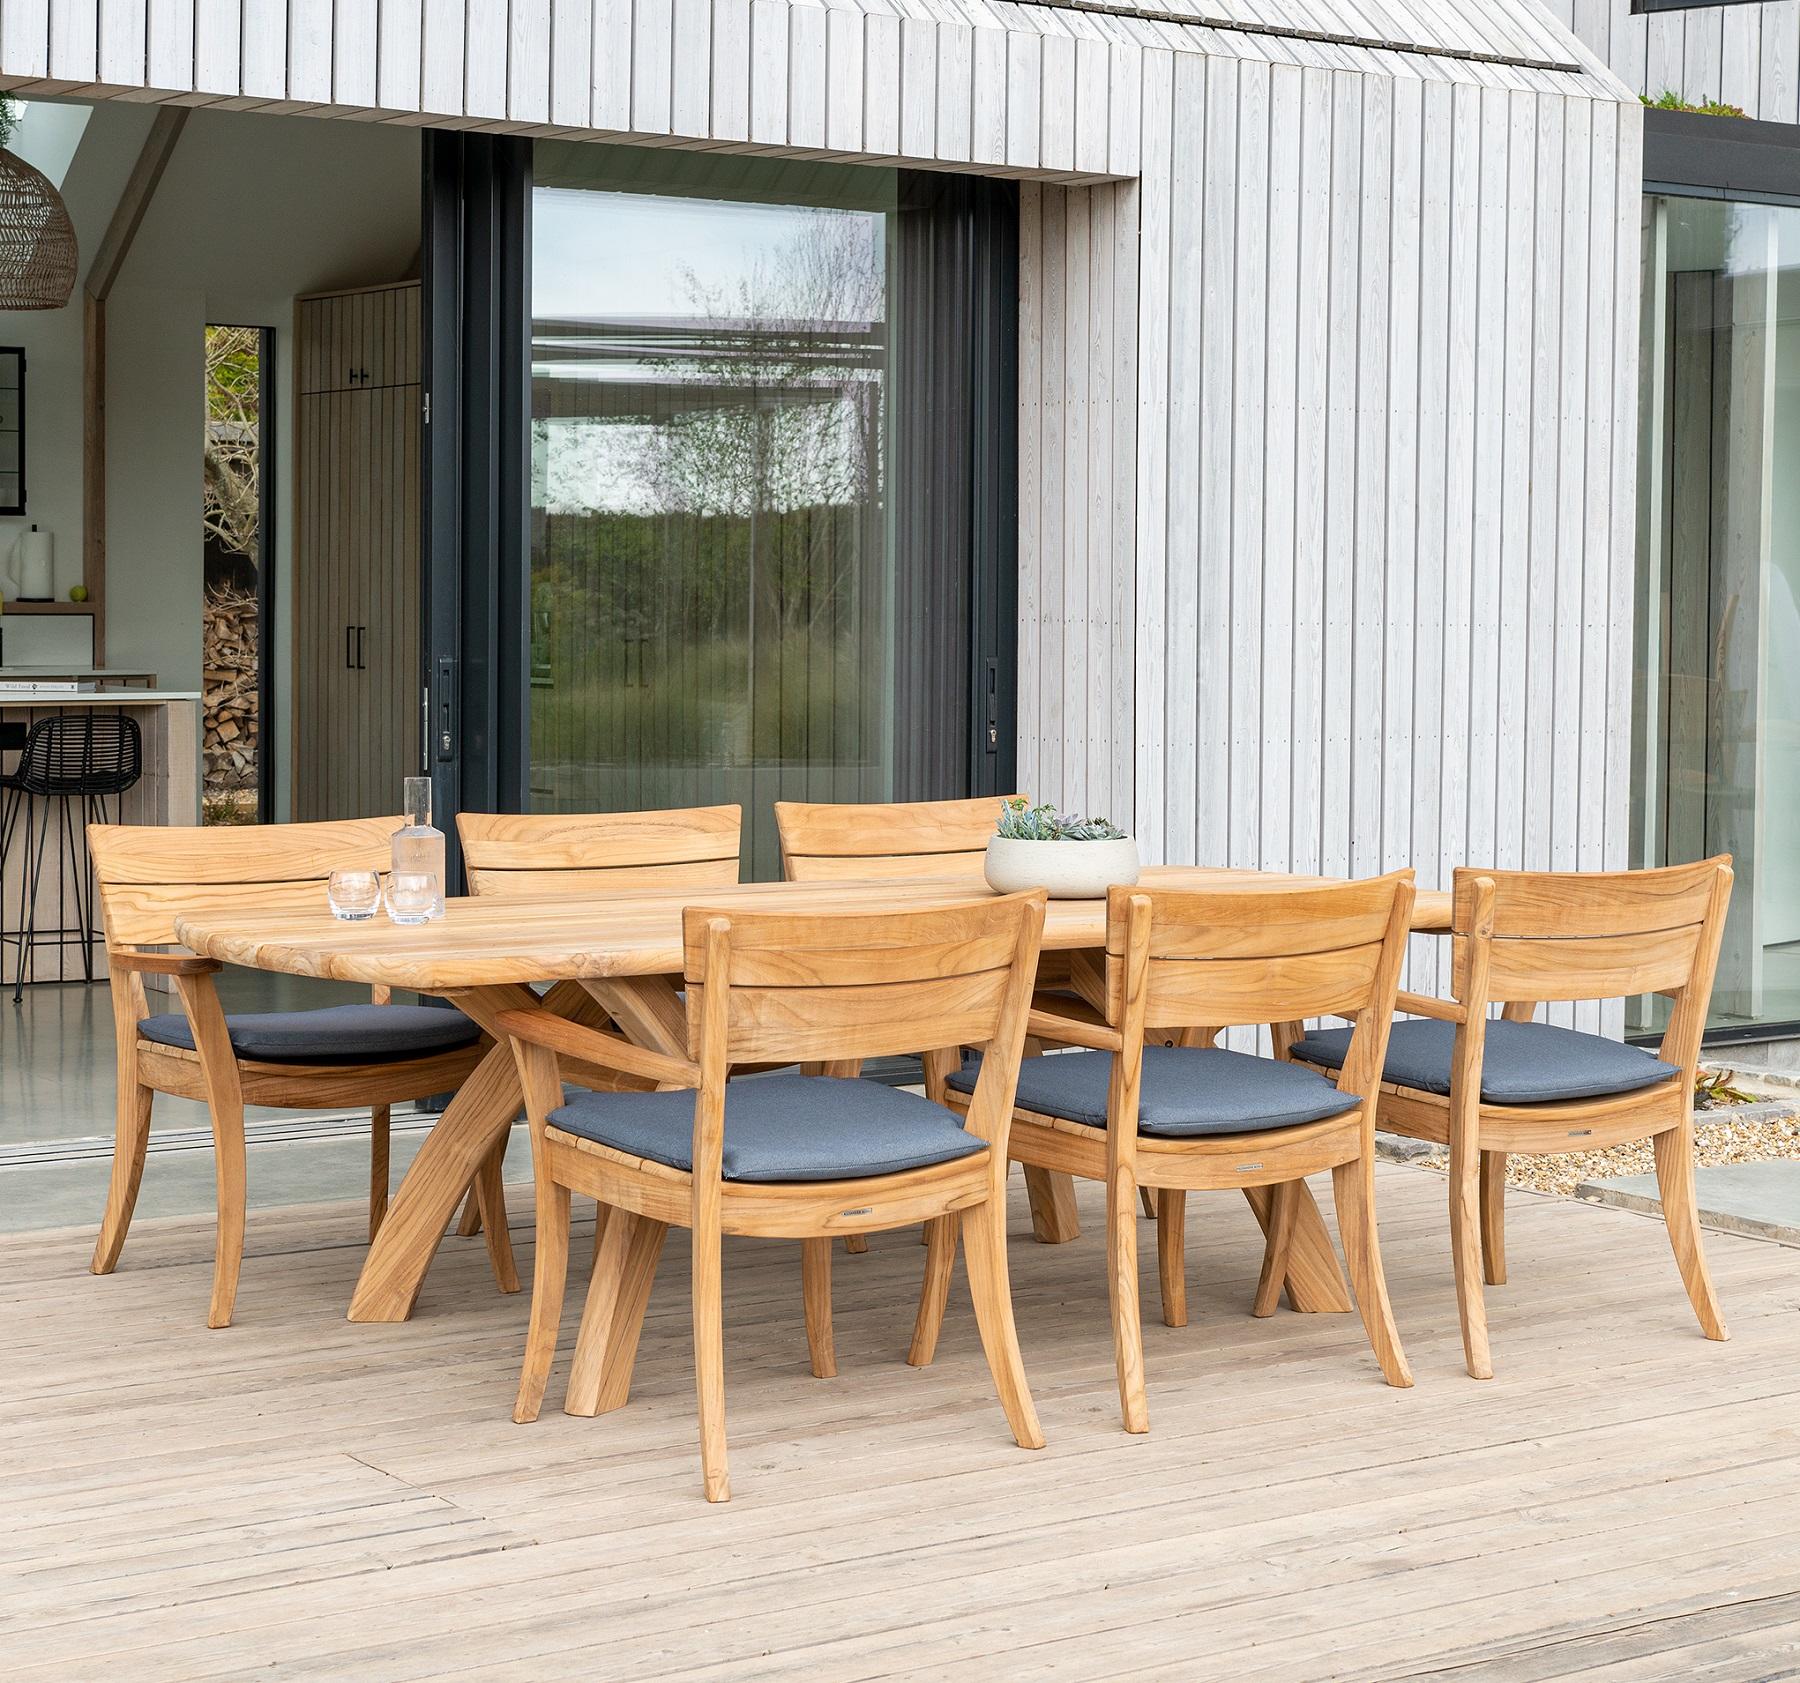 solid FSC teak garden dining table and chairs with seat cushions all weather kvadrat fabric